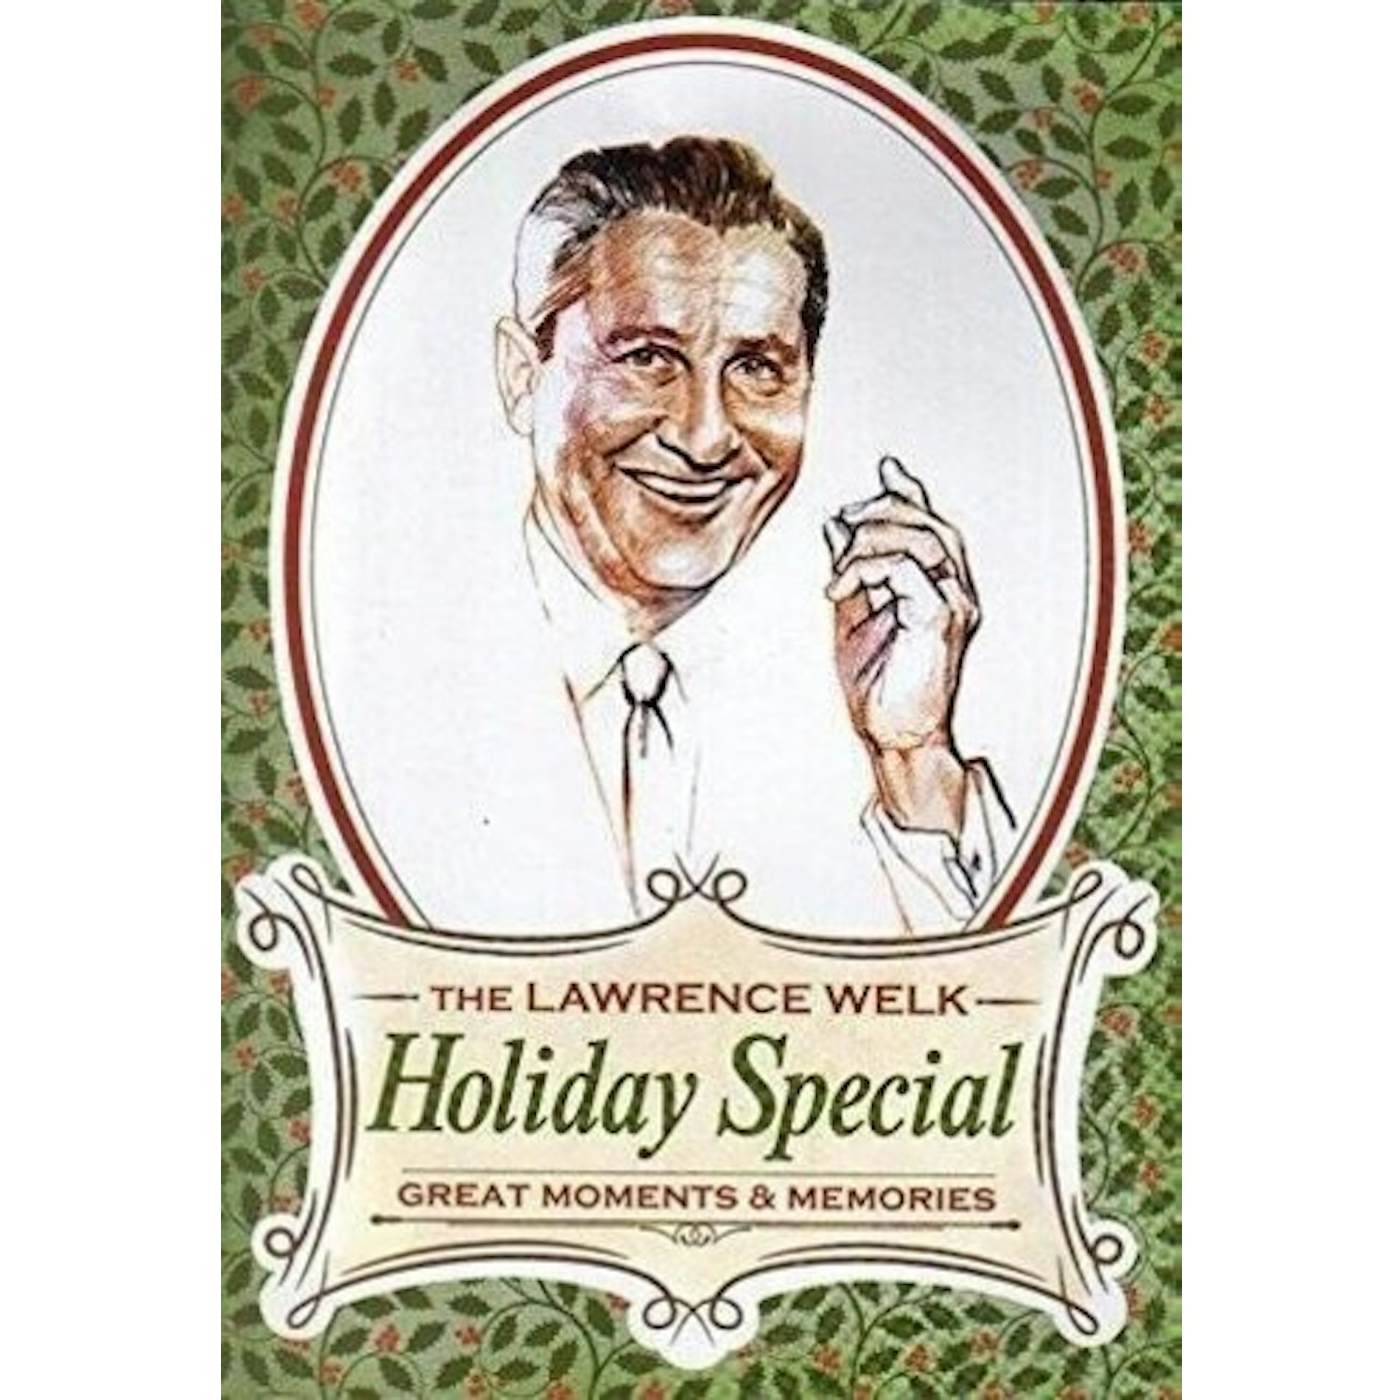 Lawrence Welk HOLIDAY SPECIAL: GREAT MOMENTS & MEMORIES DVD